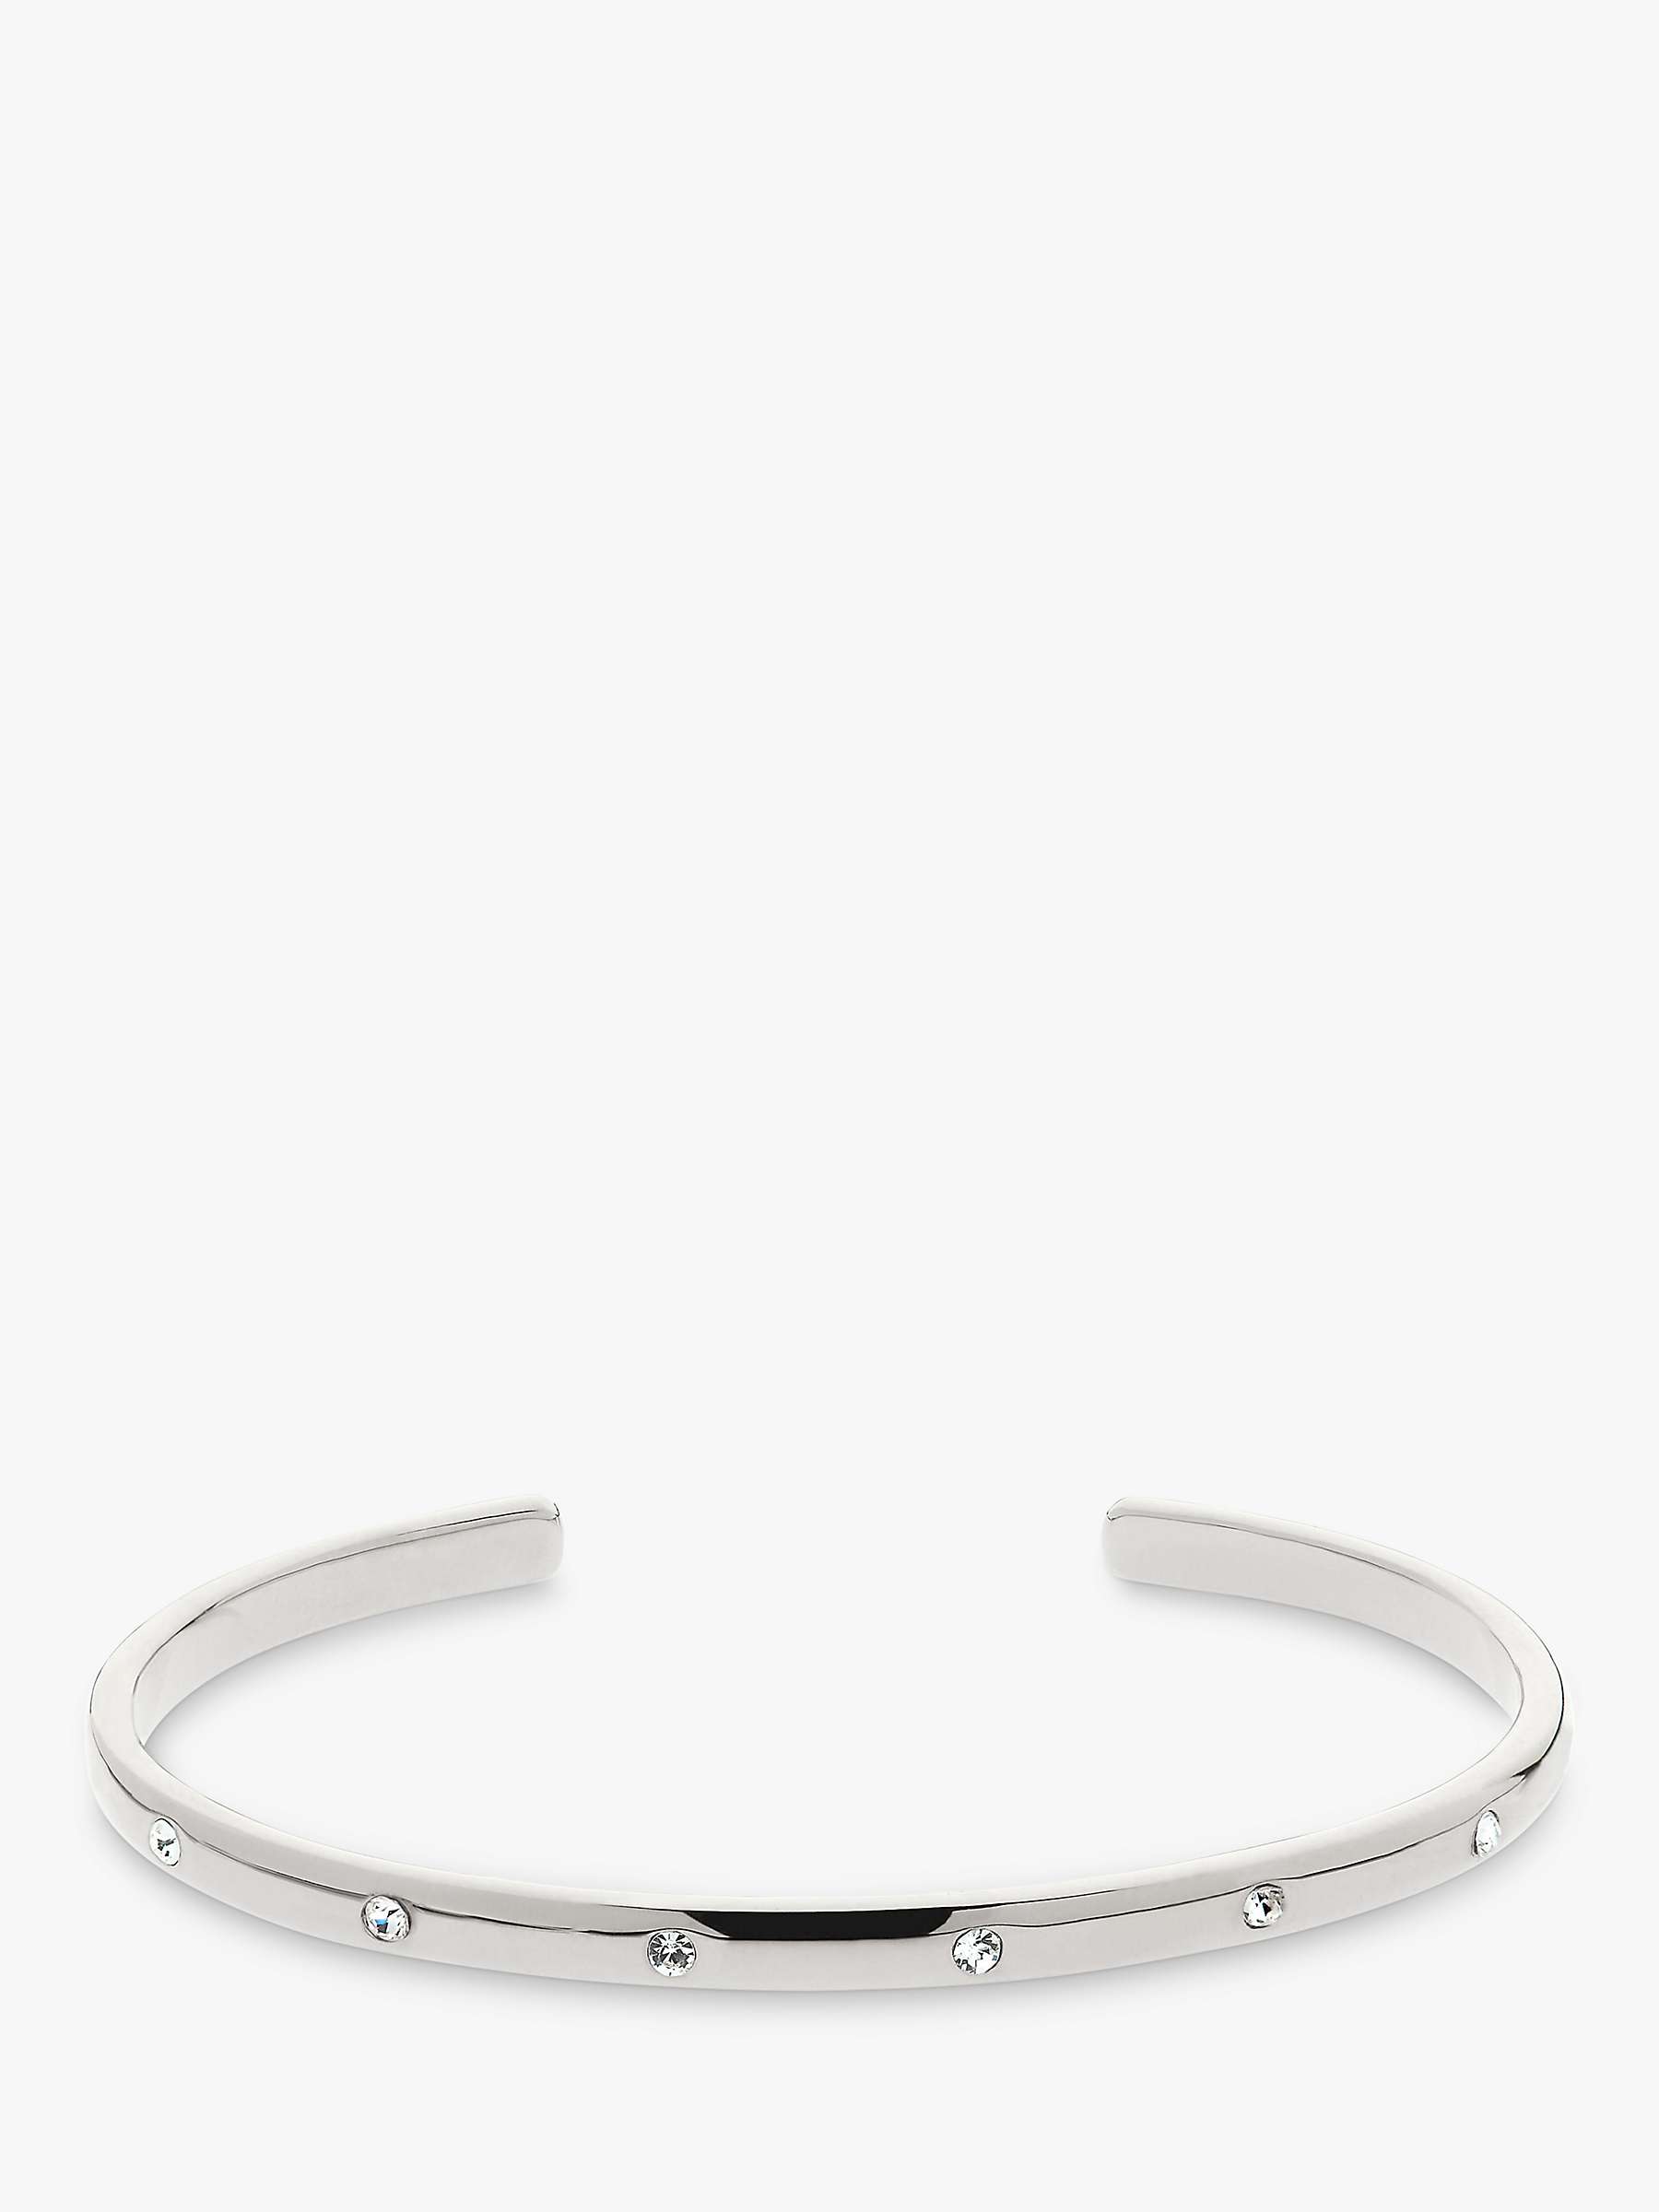 Buy Melissa Odabash Glass Crystal Open Cuff, Silver Online at johnlewis.com